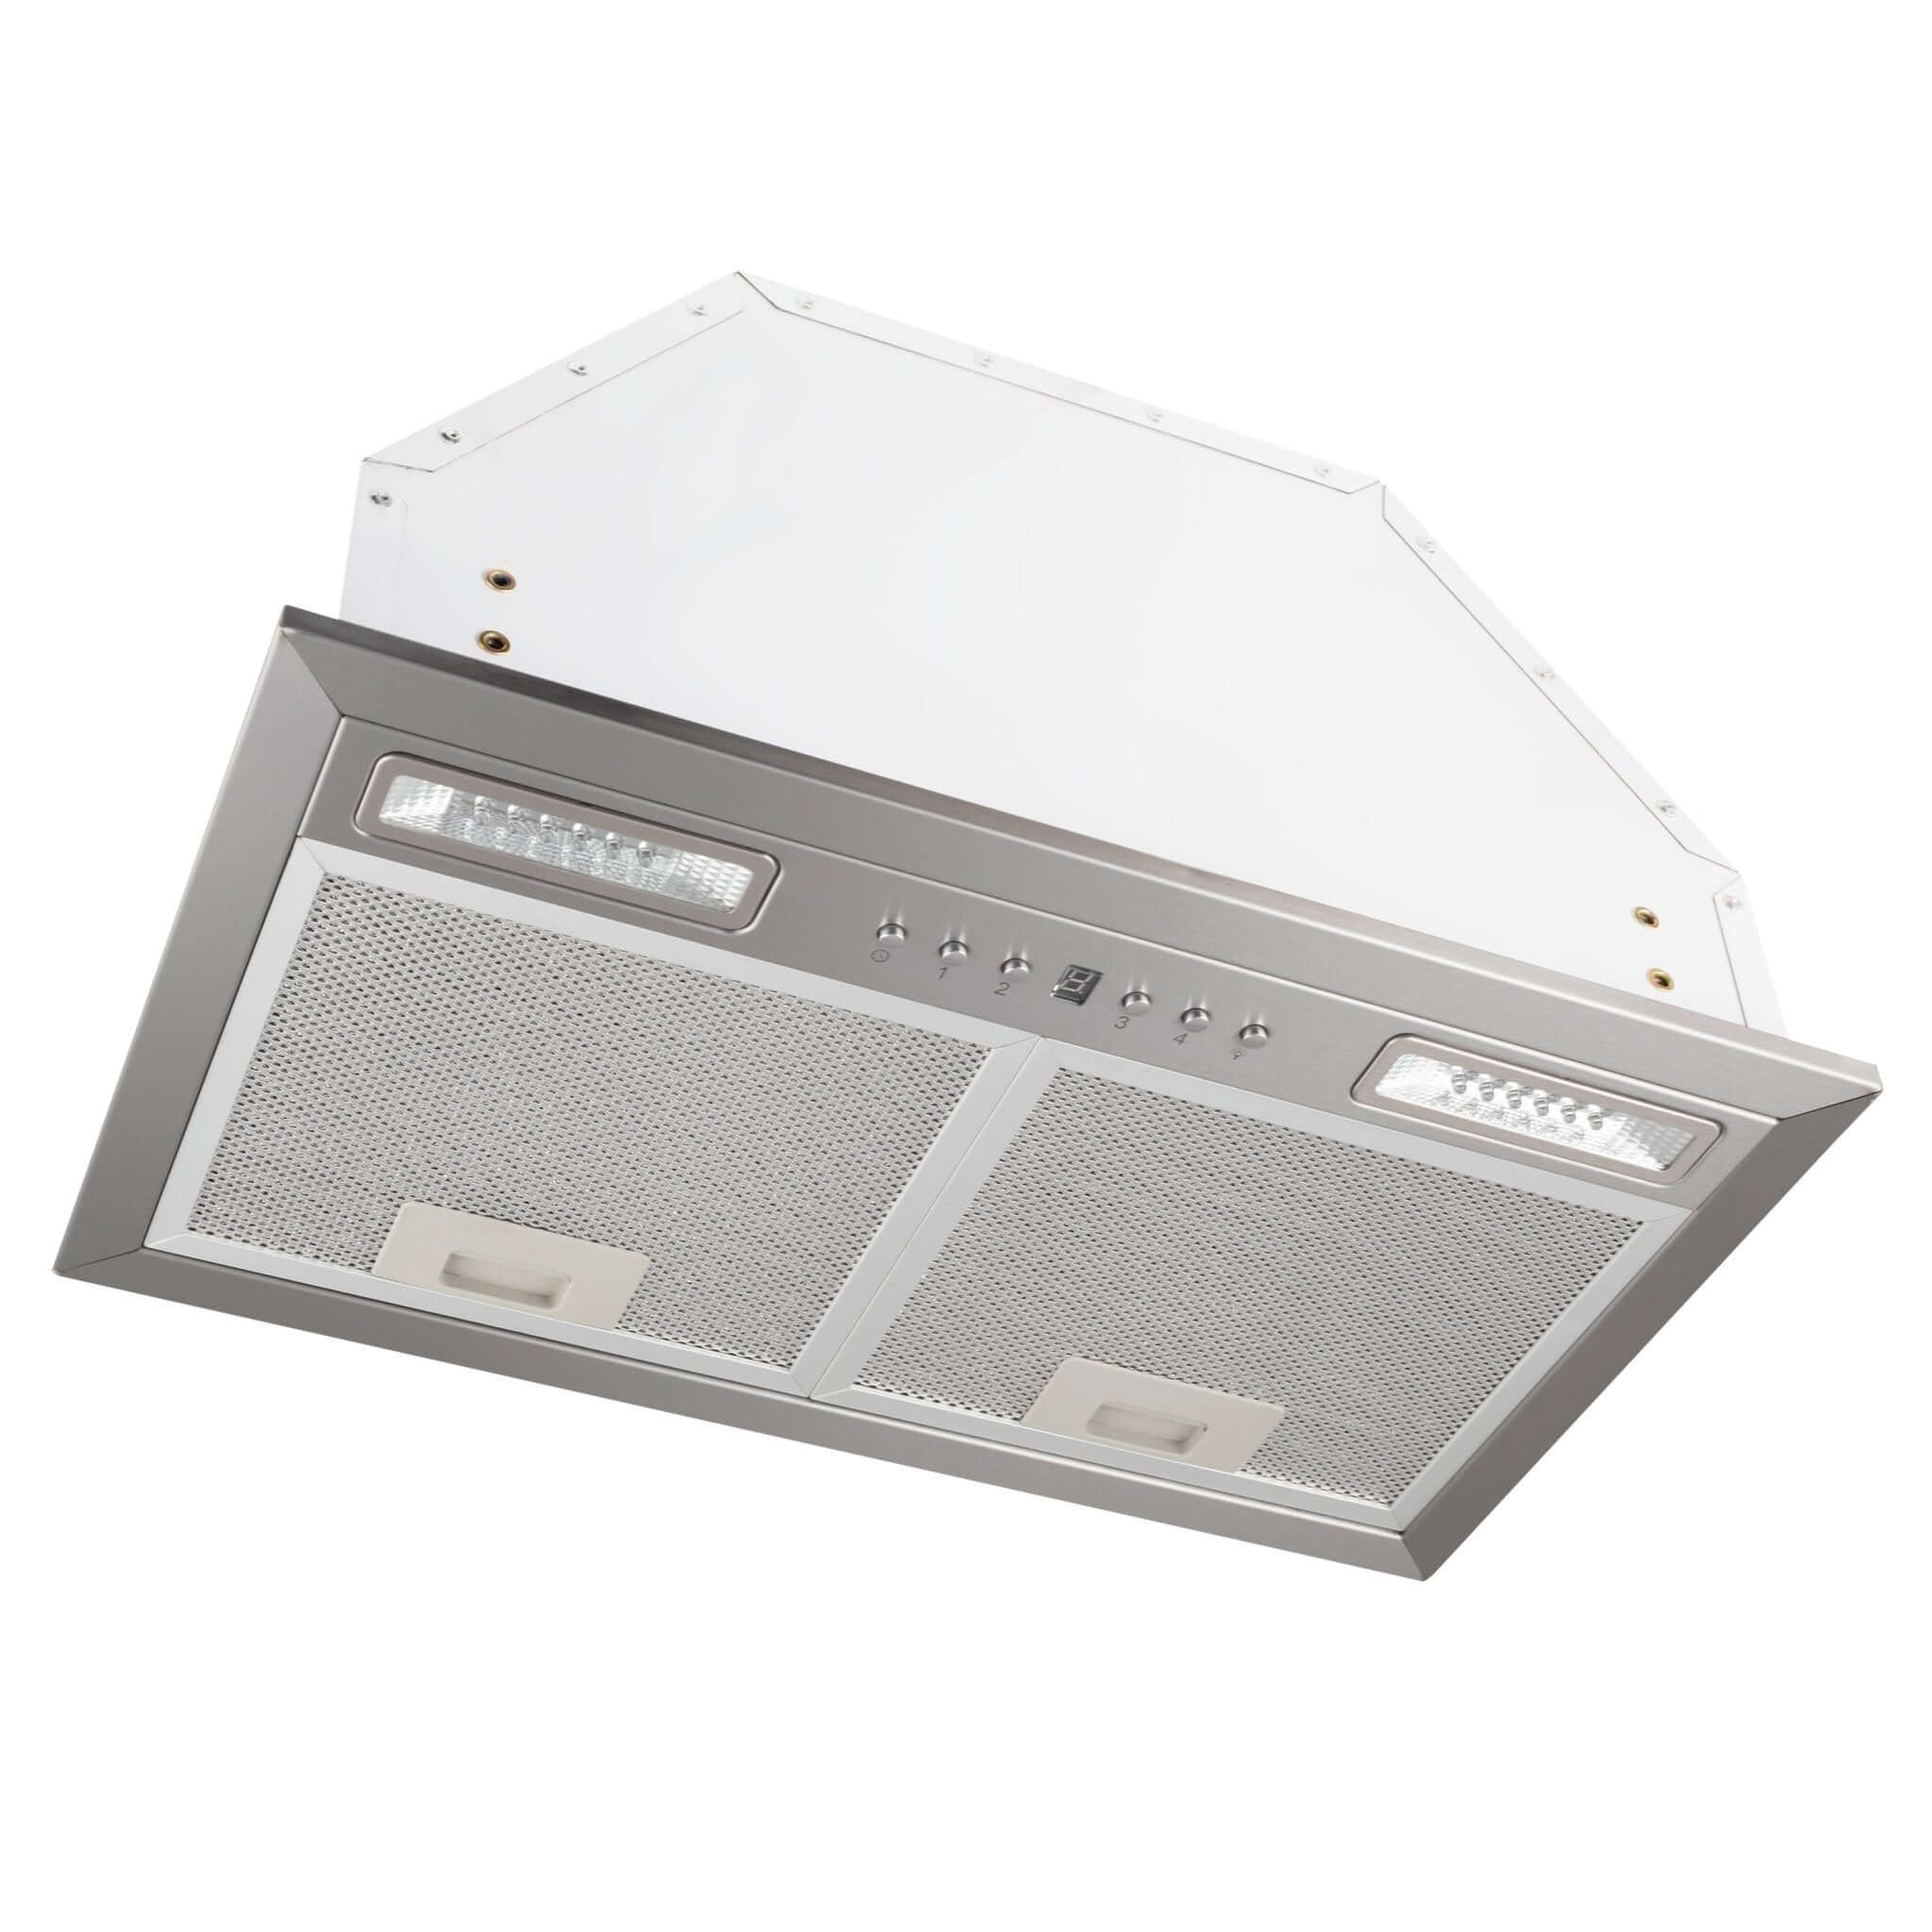 ZLINE 20.5 in. Ducted Wall Mount Range Hood Insert with LED Lighting in Stainless Steel (E690) under.